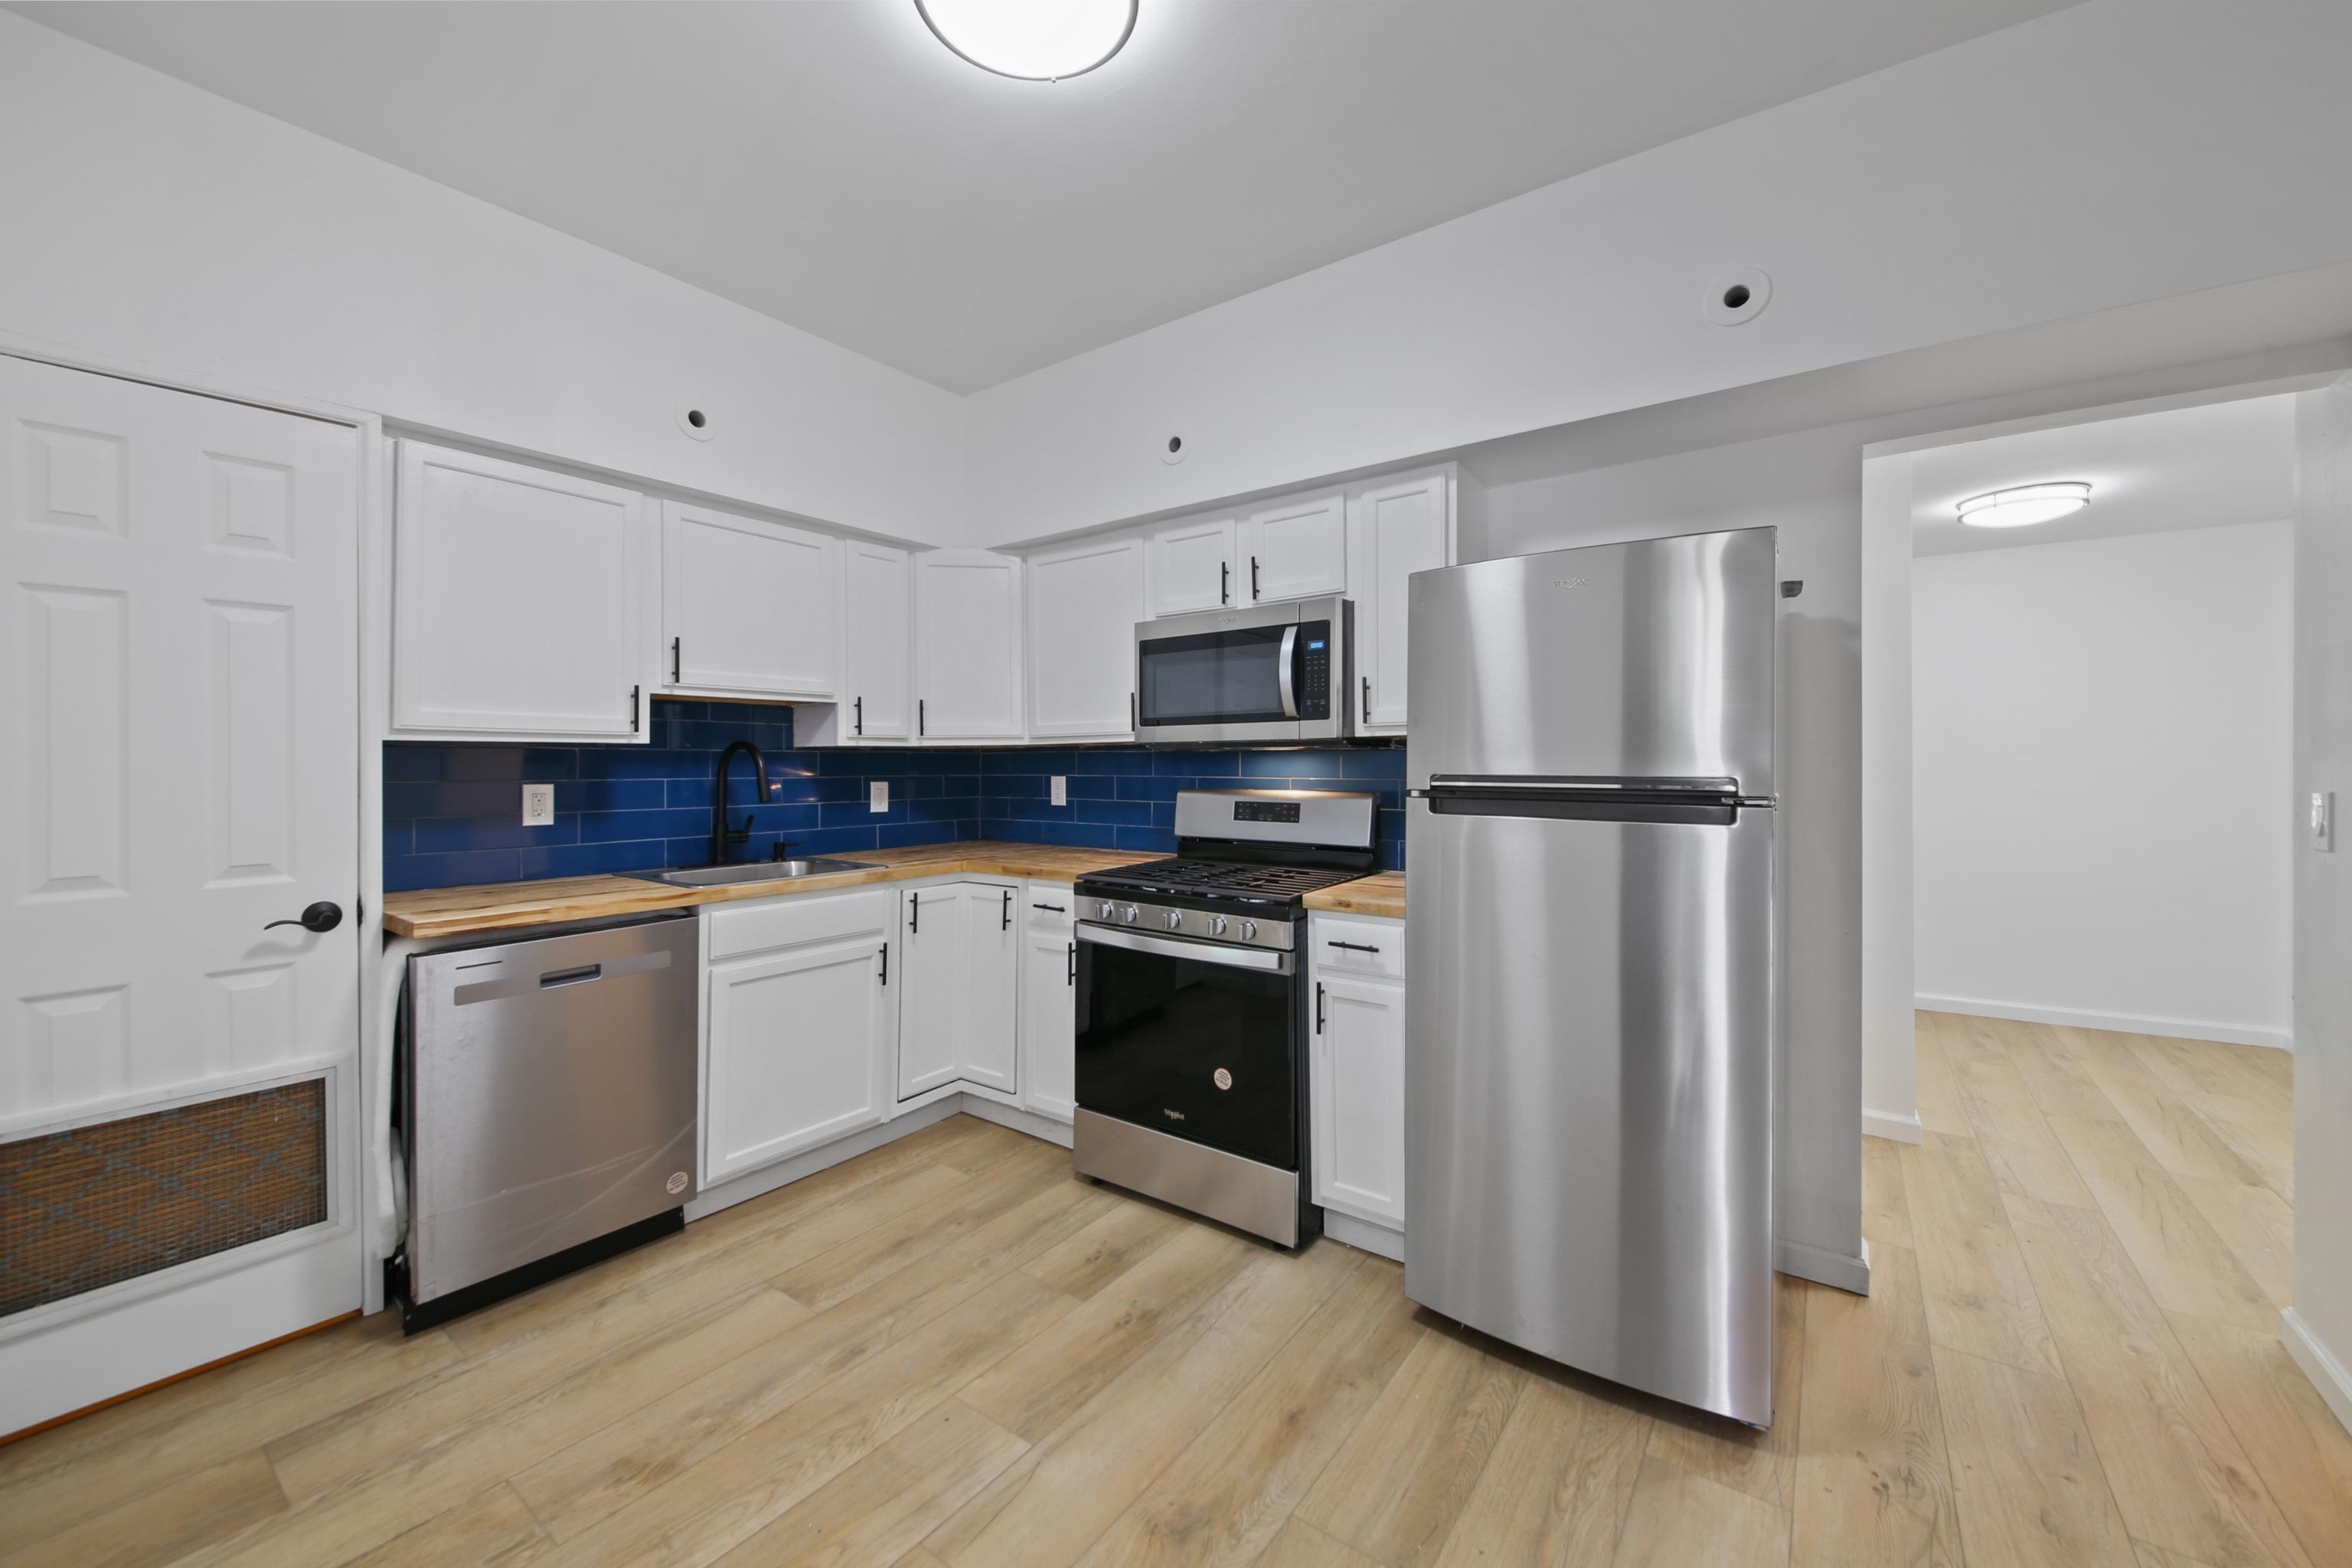 # 240009336 - For Rent in JERSEY CITY - Heights NJ